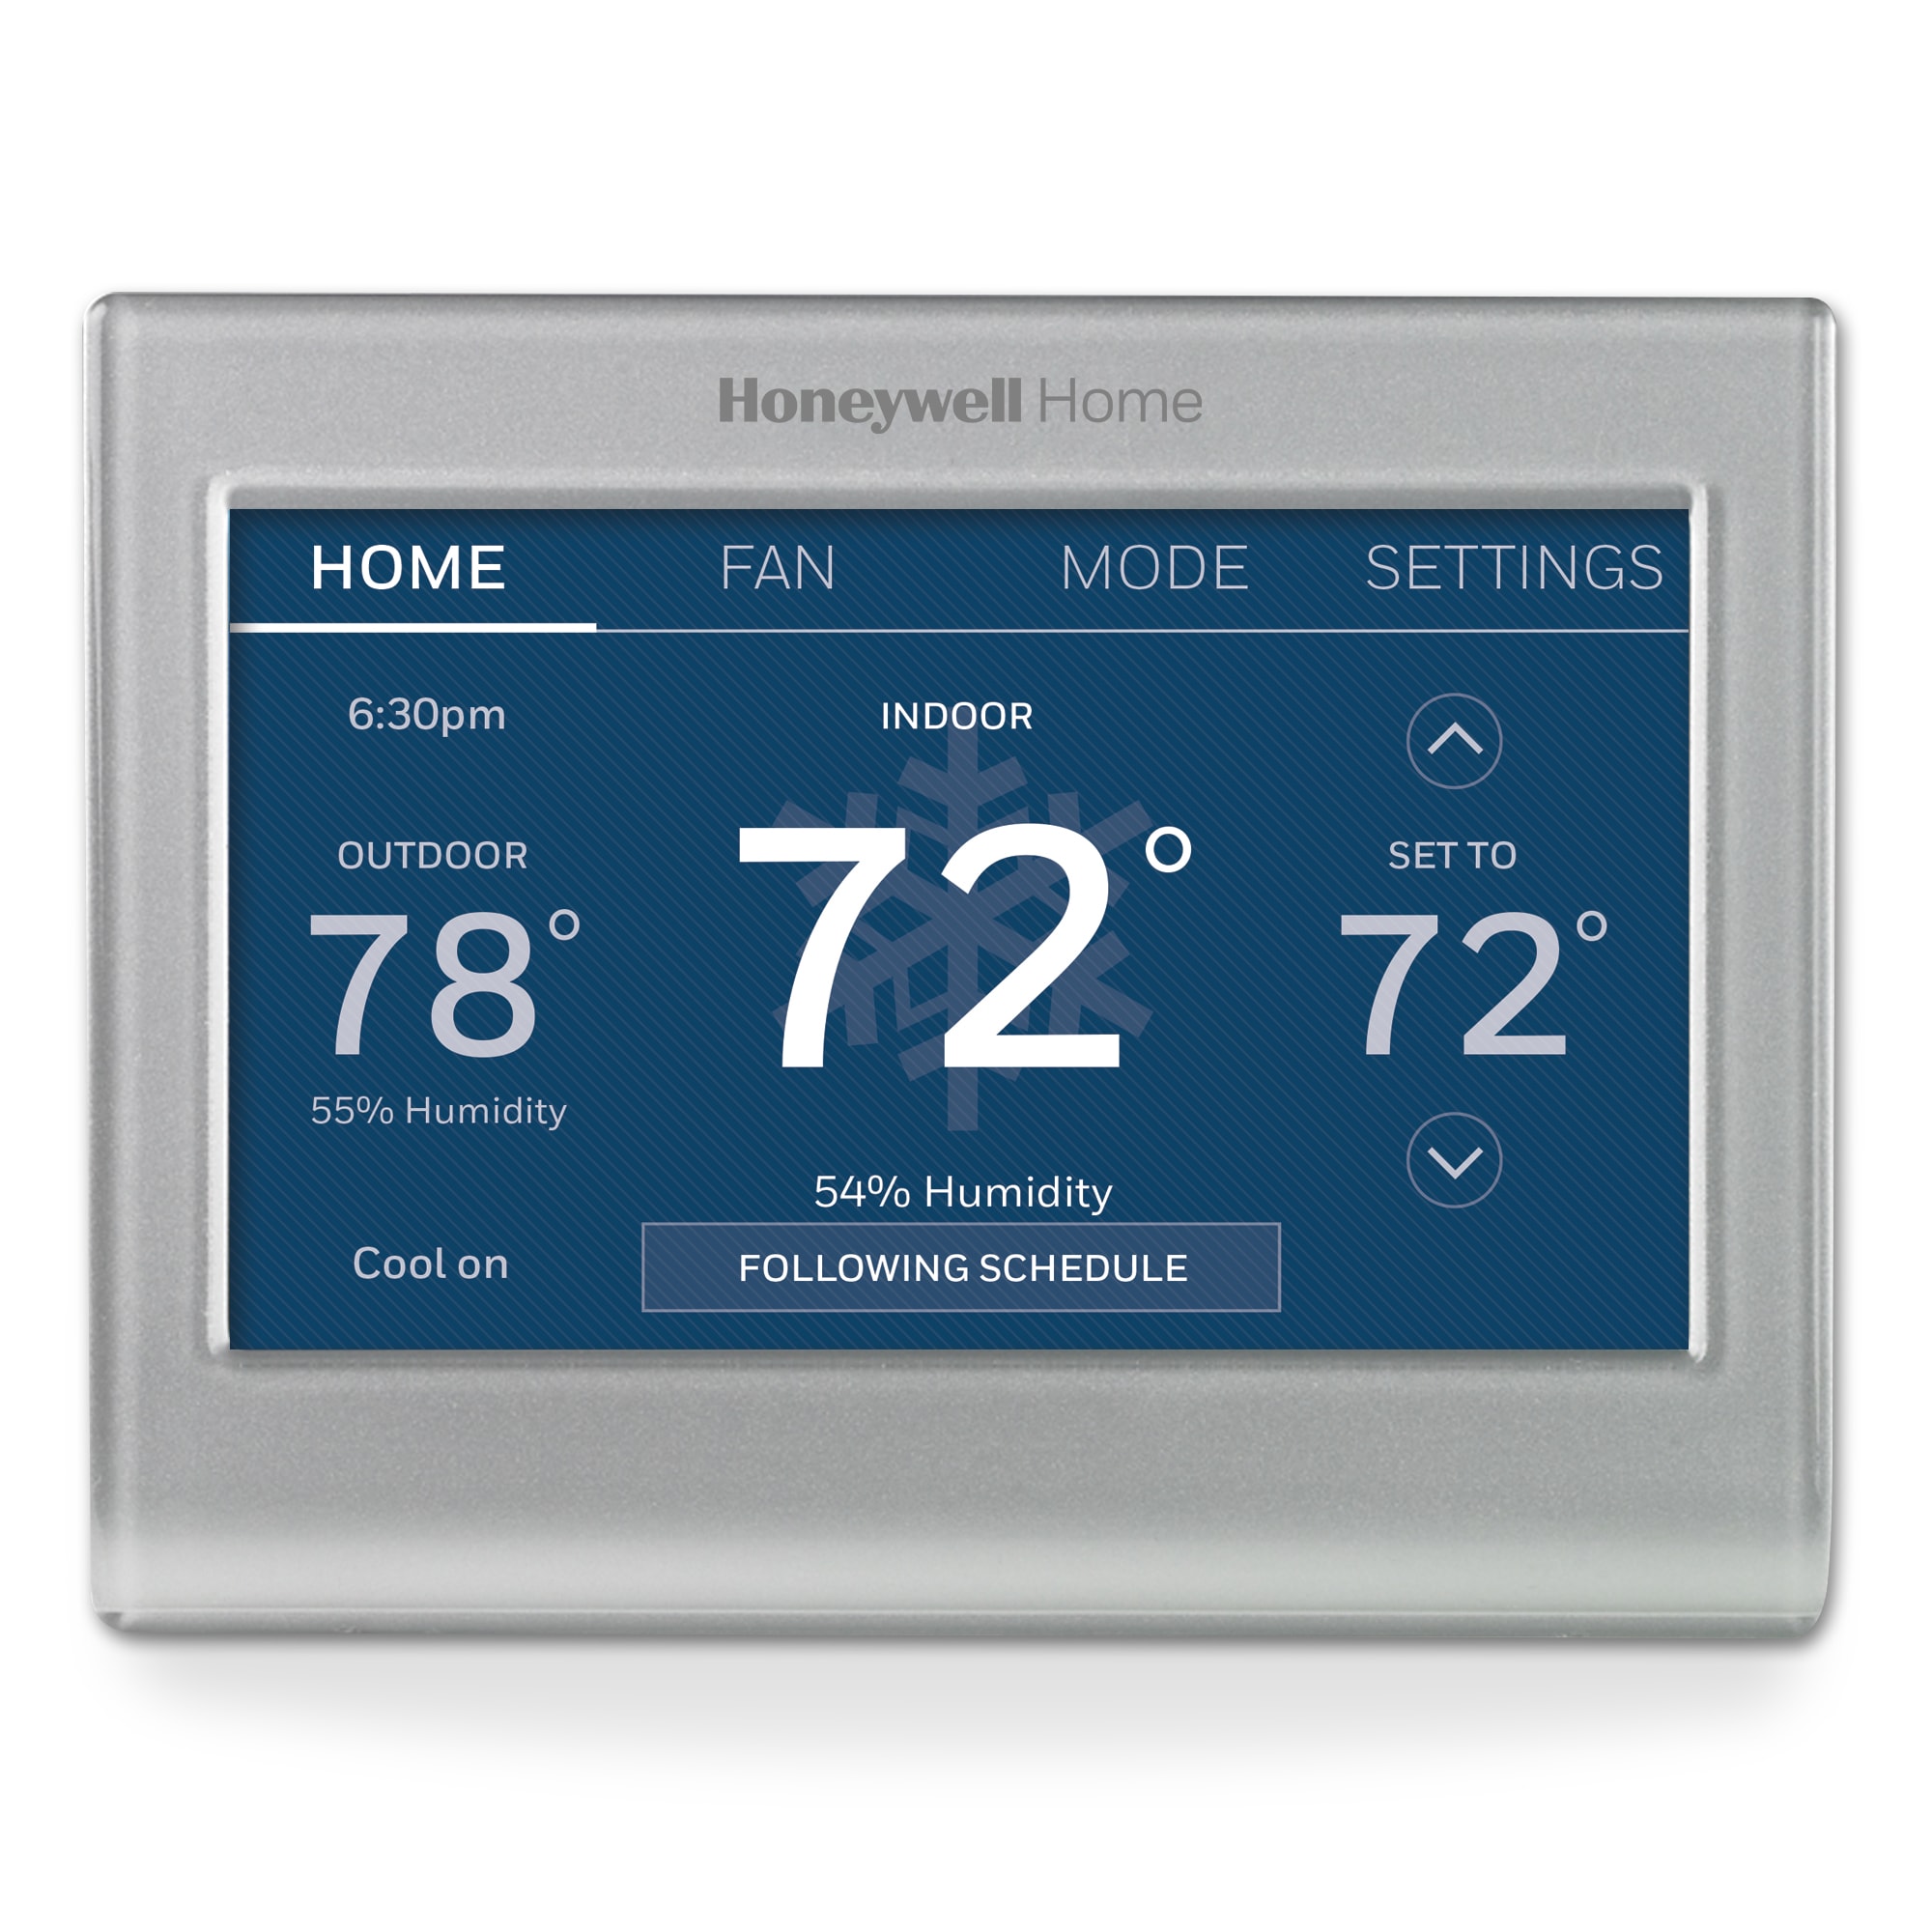 Honeywell Home White Smart Thermostat with Wi-Fi Compatibility in